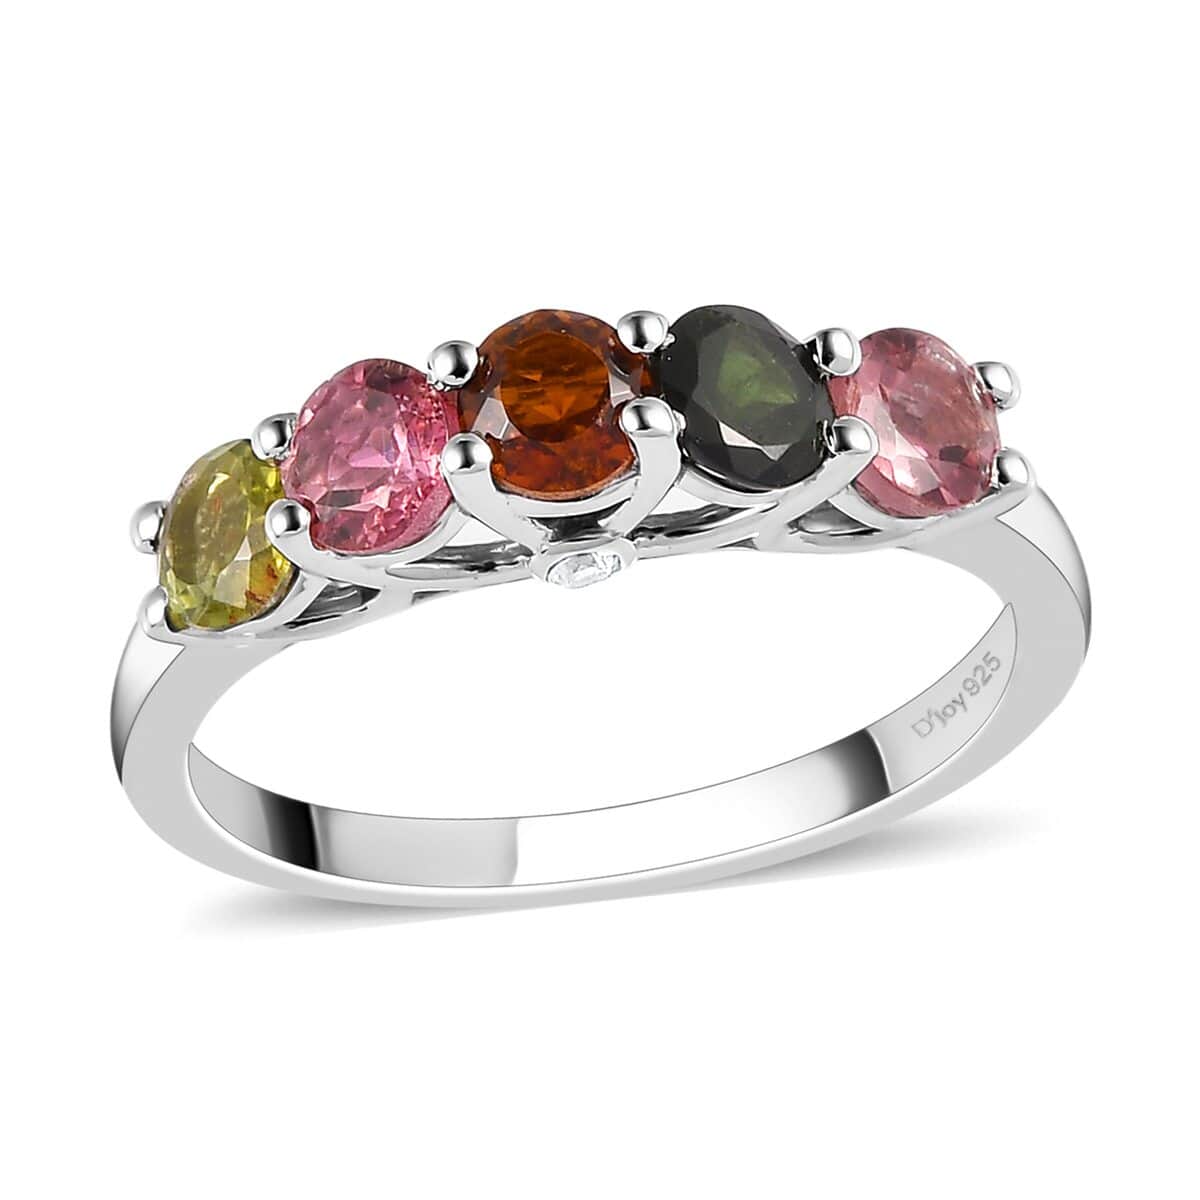 doorbuster-multi-tourmaline-and-natural-white-zircon-5-stone-ring-in-platinum-over-sterling-silver-size-10.0-1.35-ctw image number 0